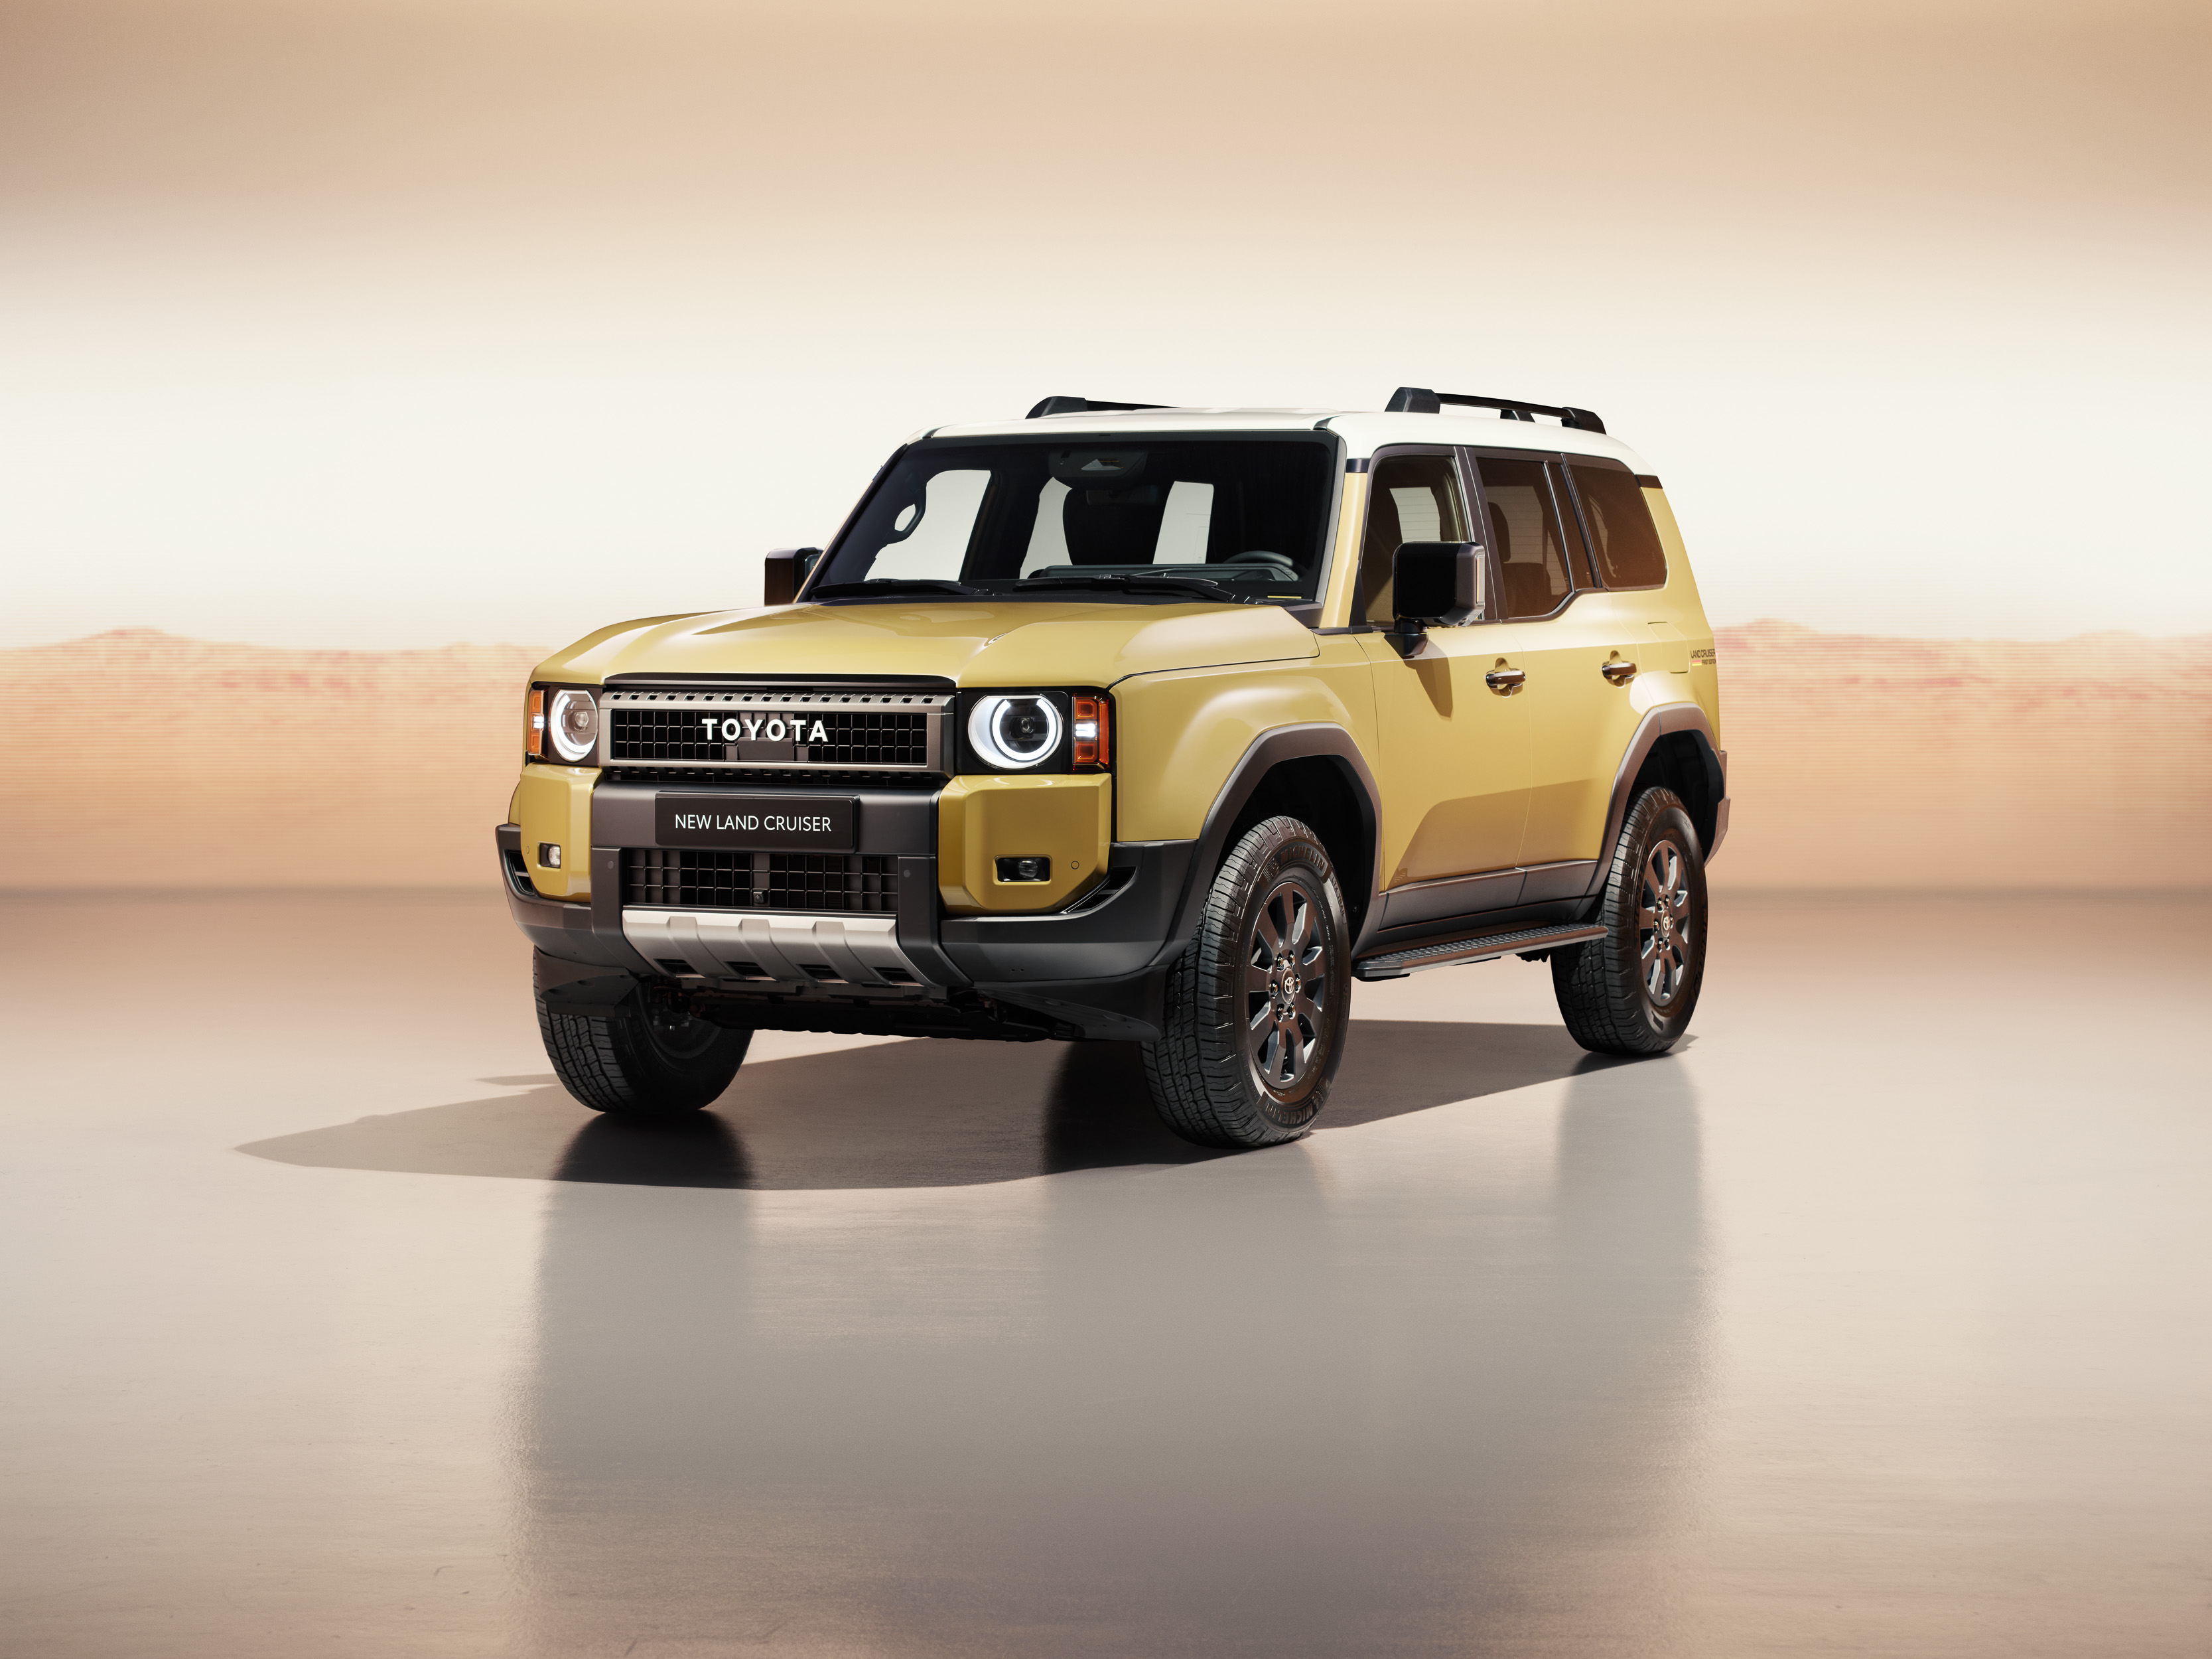 Featured image for “Toyota Land Cruiser”